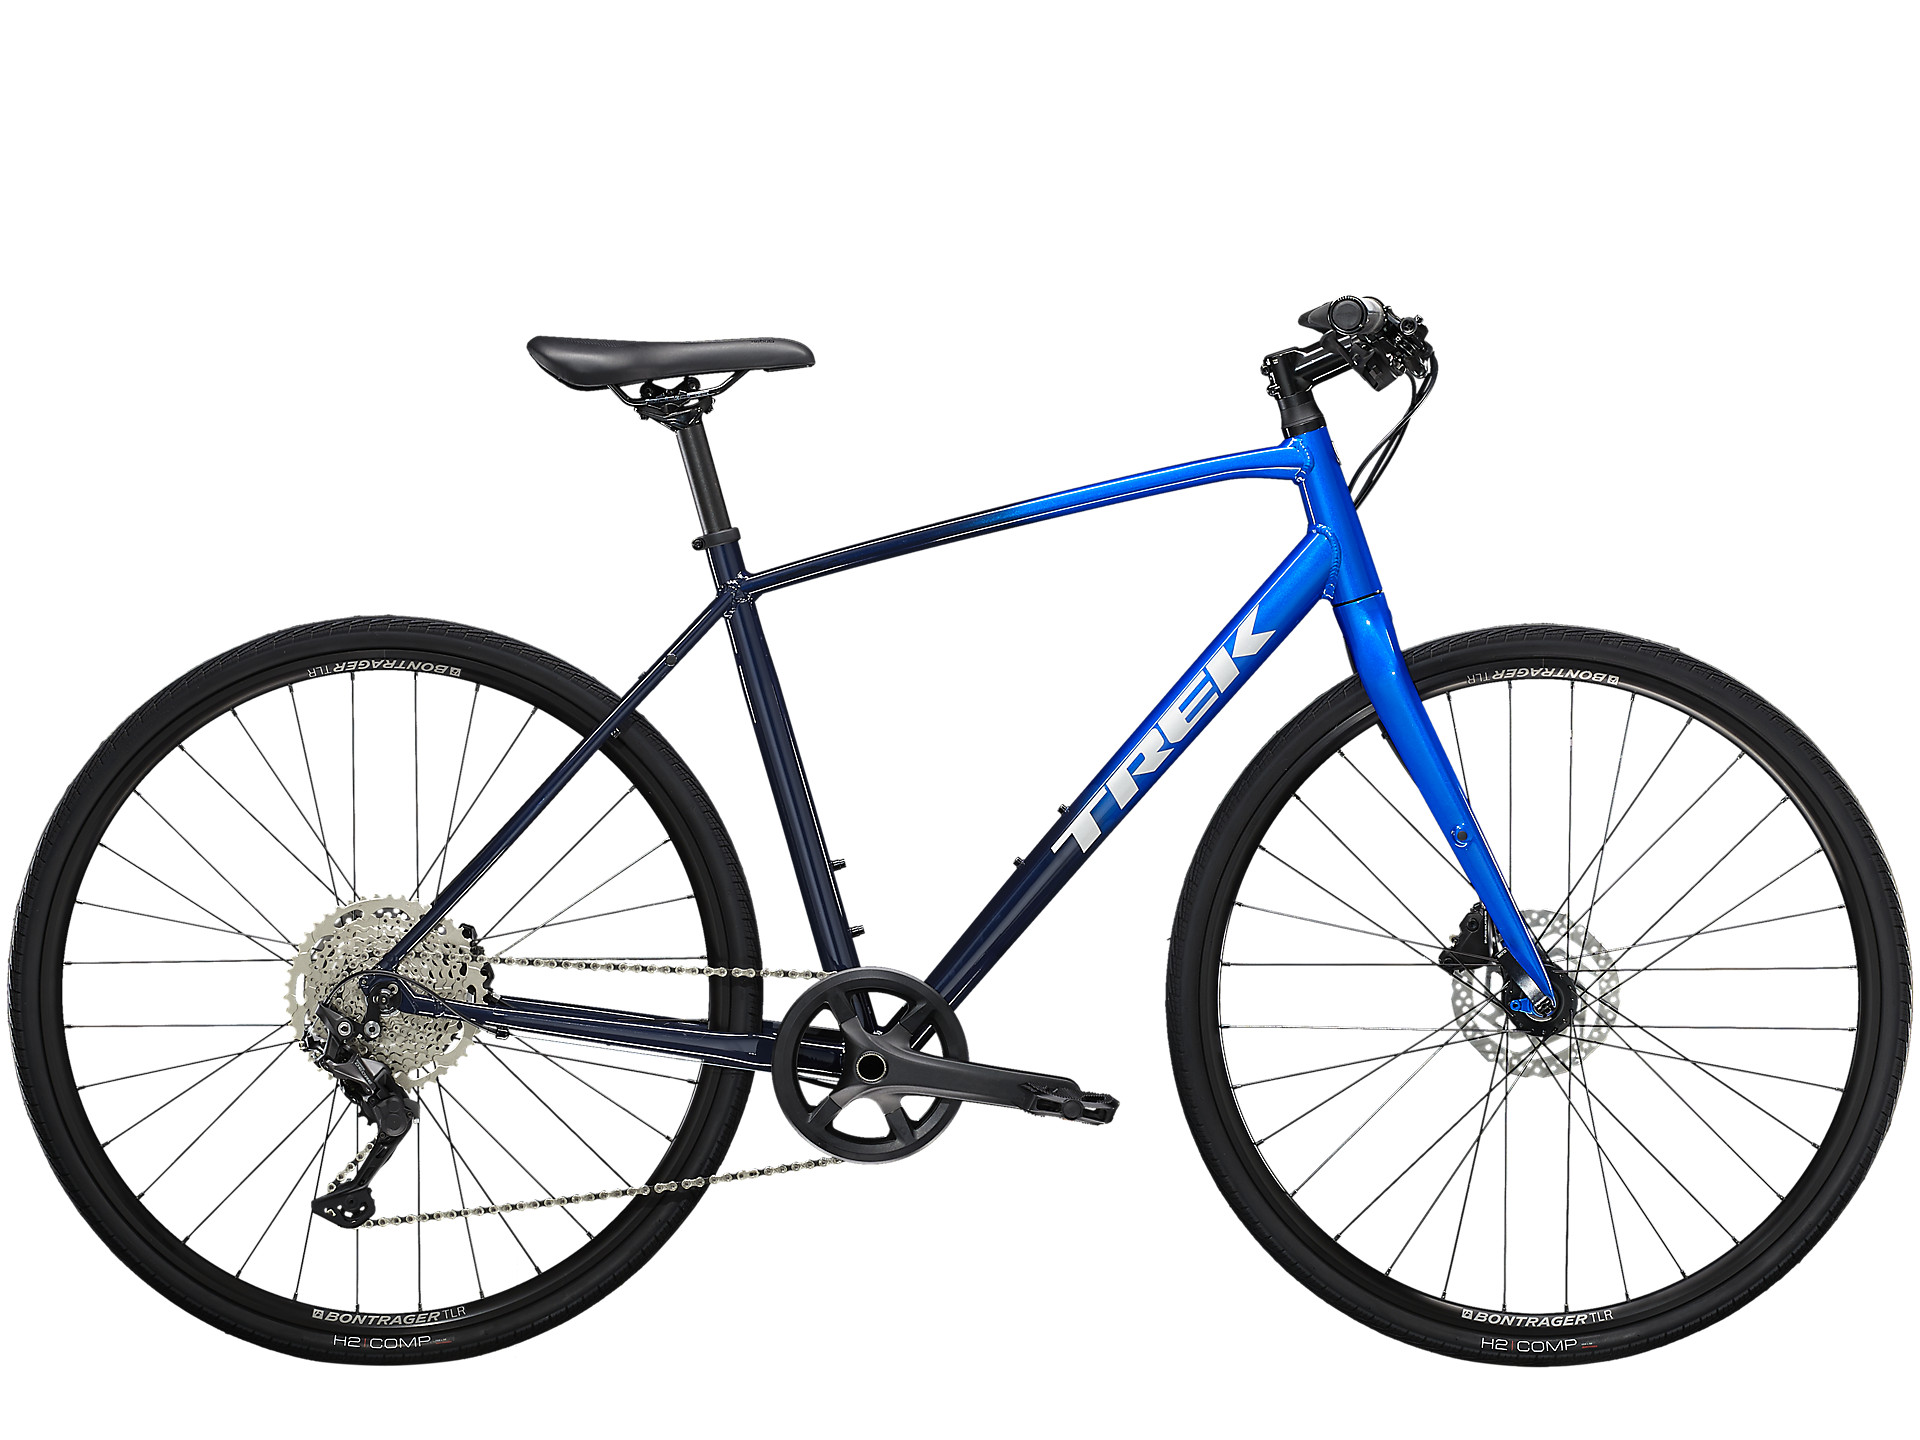 Blue Trek FX 3 Disc hybrid bike with disc brakes that can be used as a gravel bike.